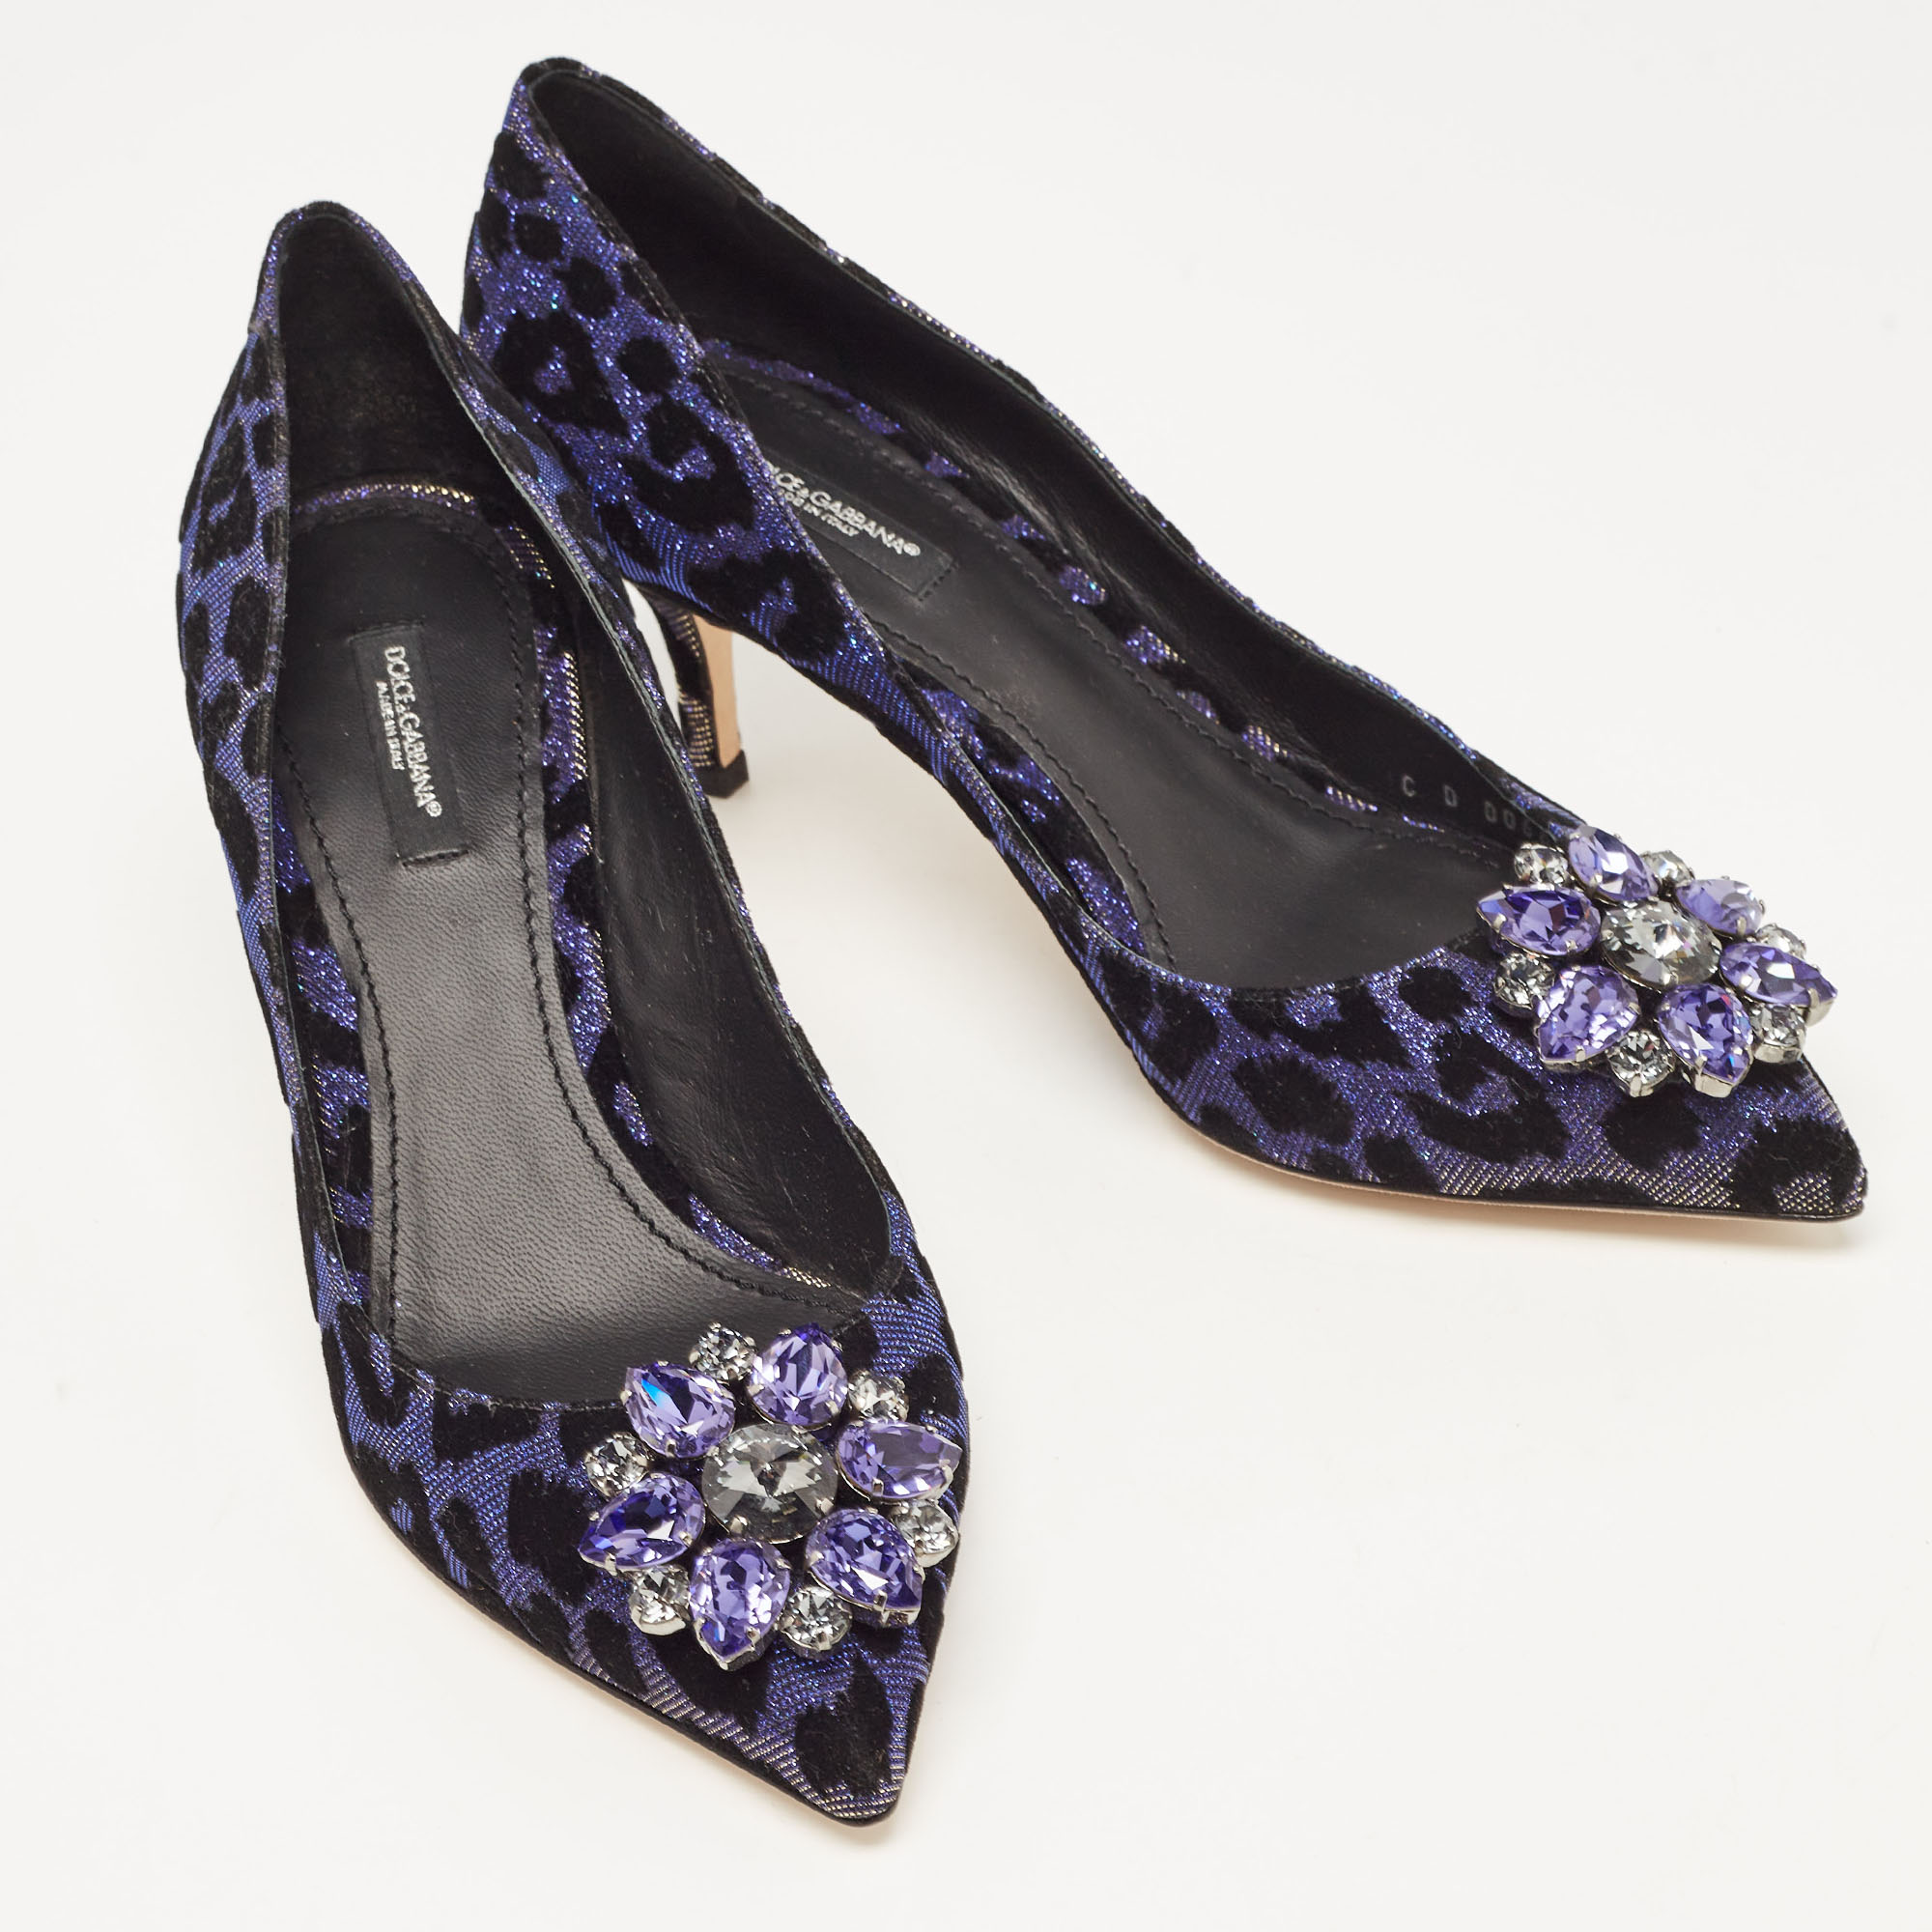 Dolce & Gabbana Black/Purple Glitter Fabric Bellucci Crystal Embellished Pointed Toe Pumps Size 39